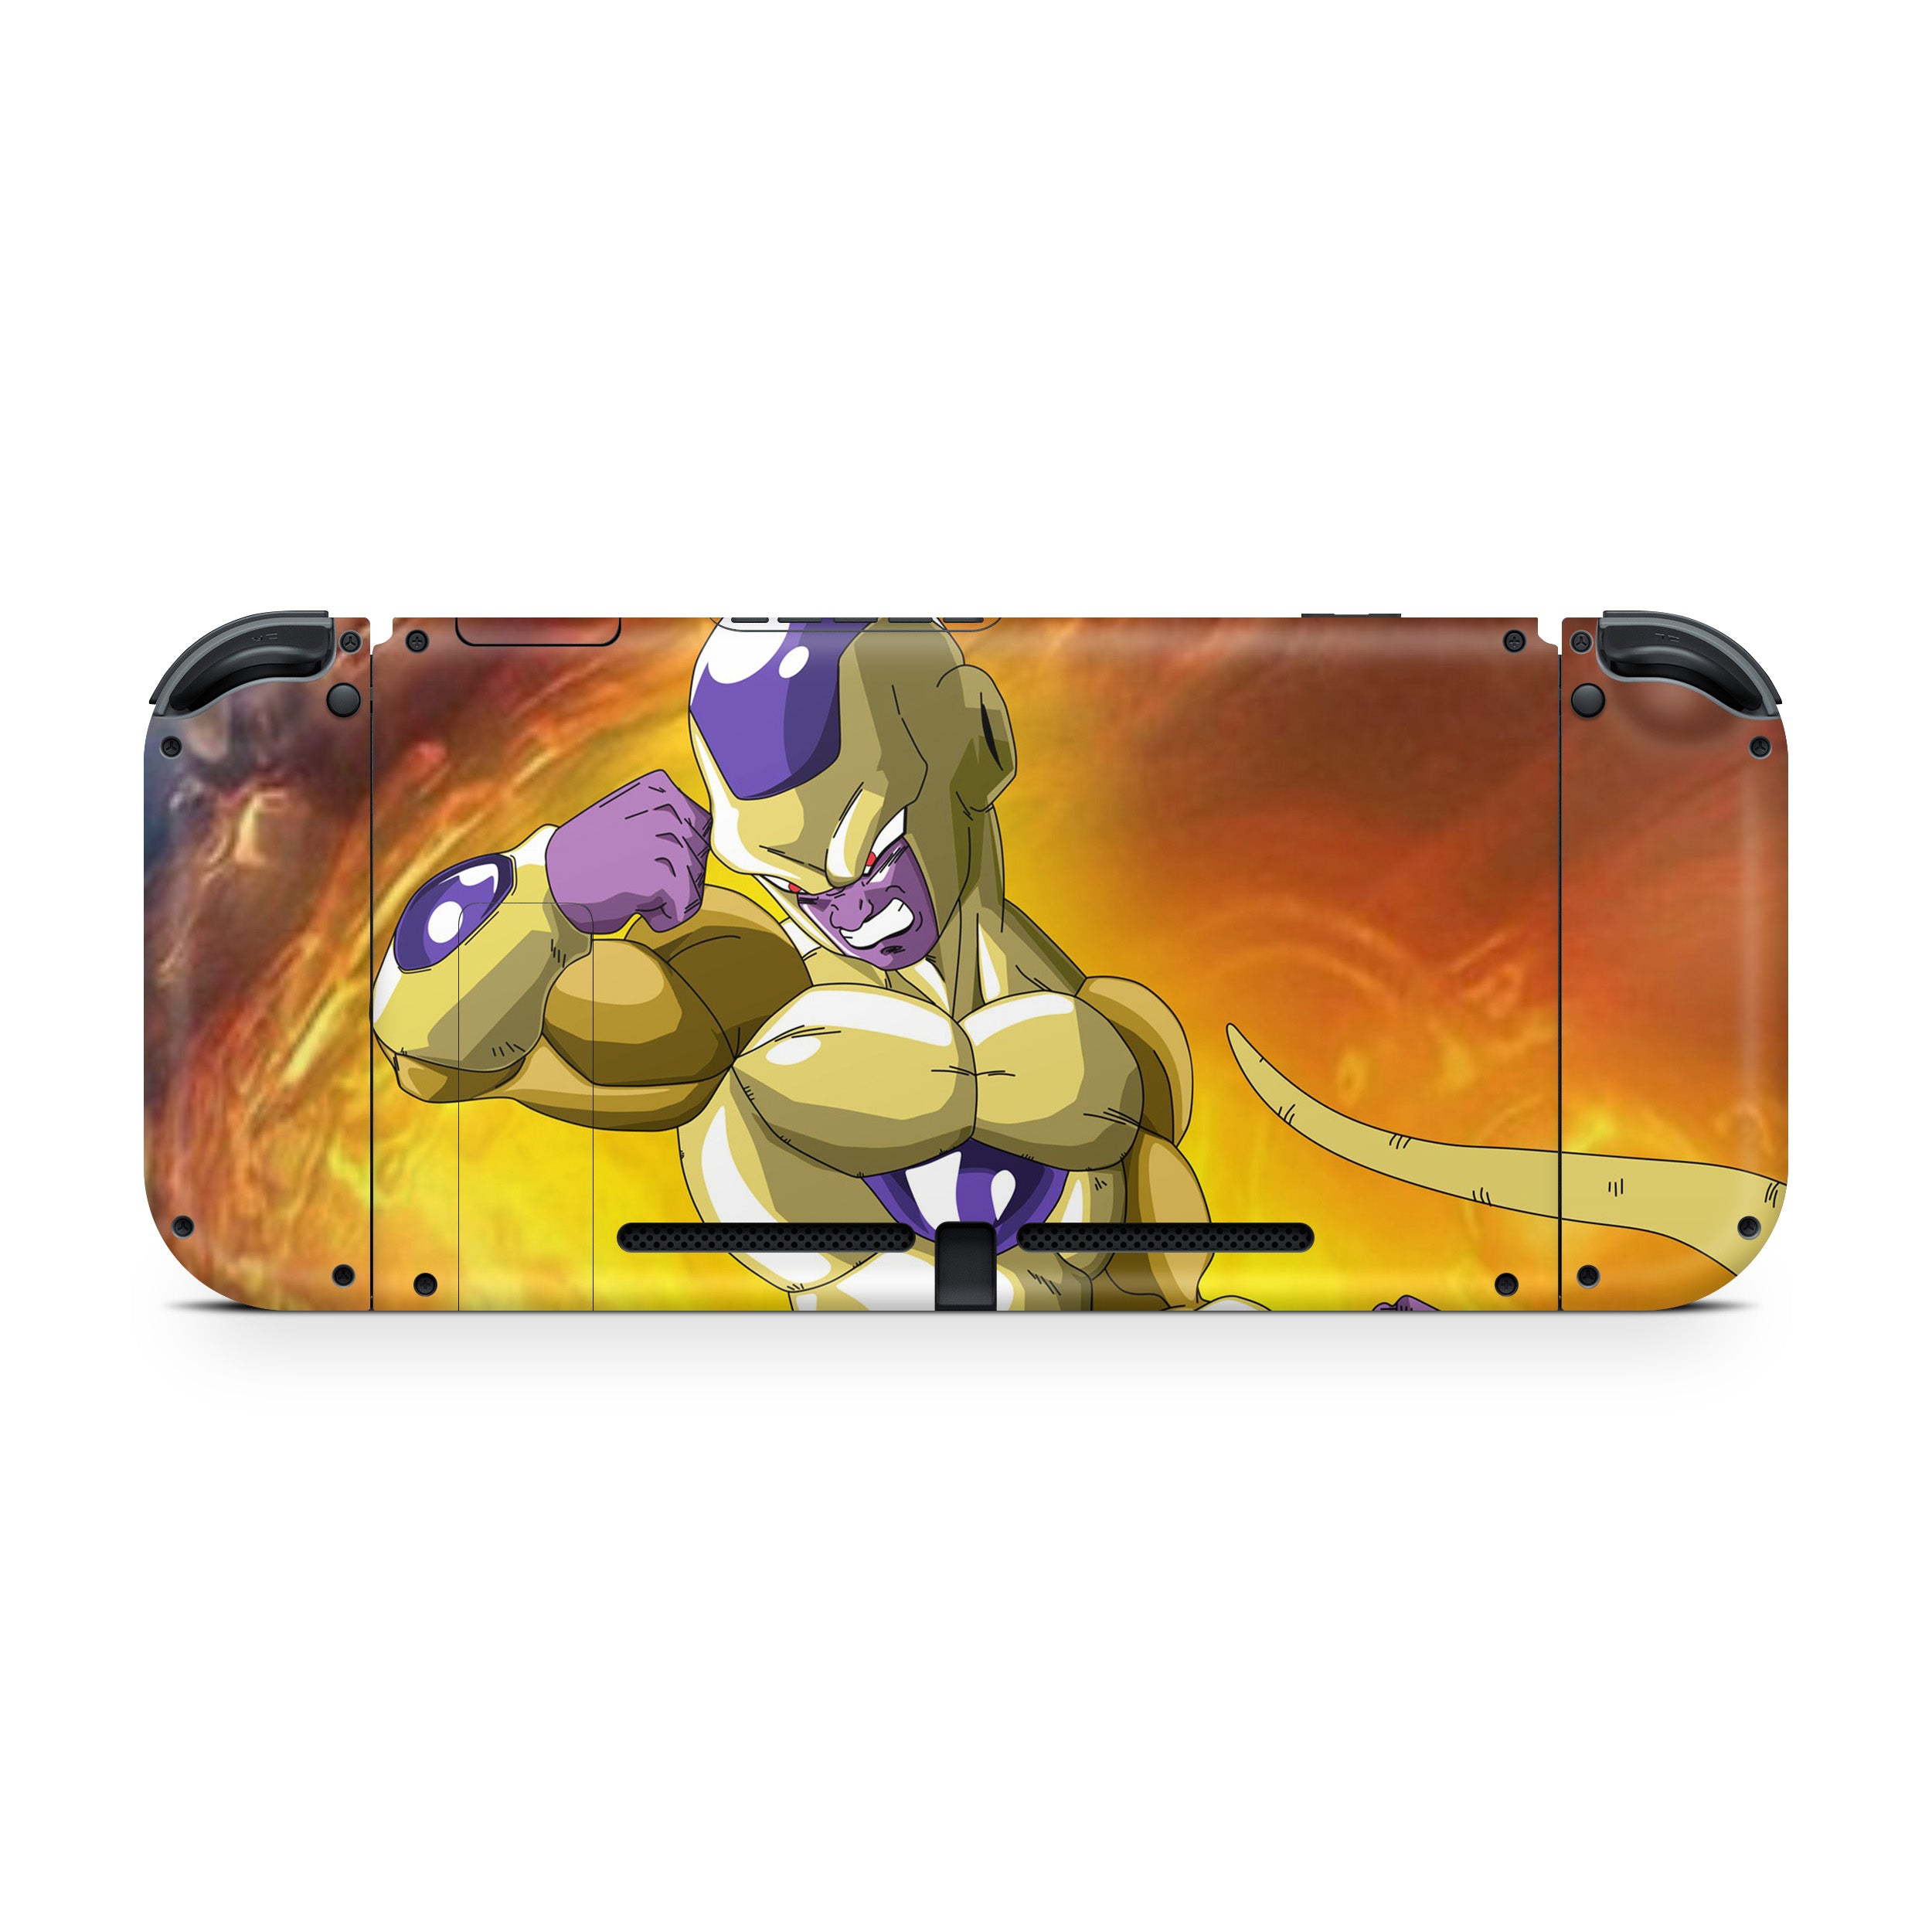 A video game skin featuring a Dragon Ball Super Frieza design for the Nintendo Switch.